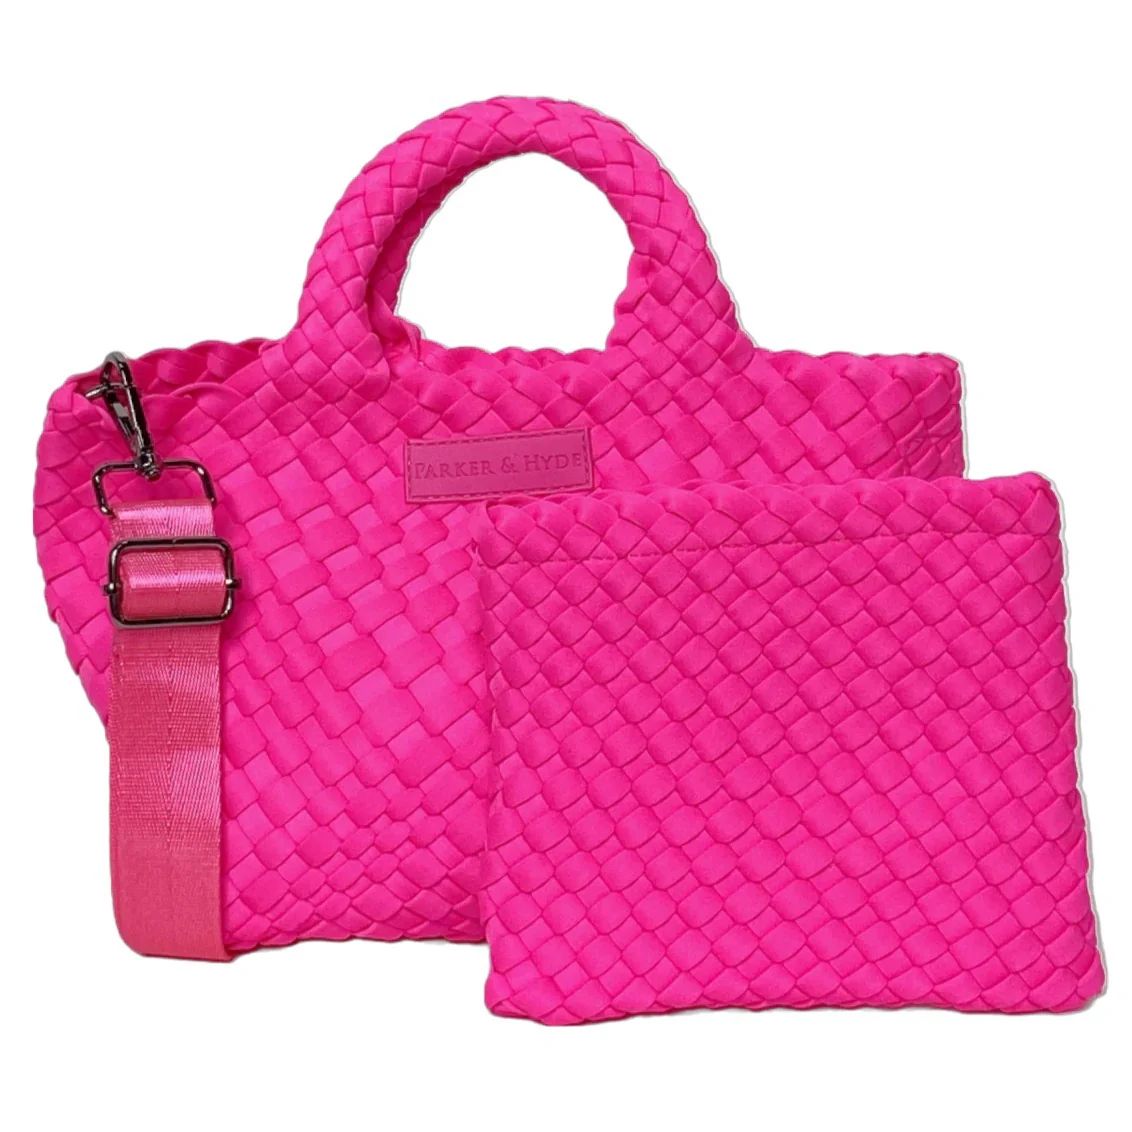 Neon Pink Woven Mini Tote | Lovely Little Things Boutique